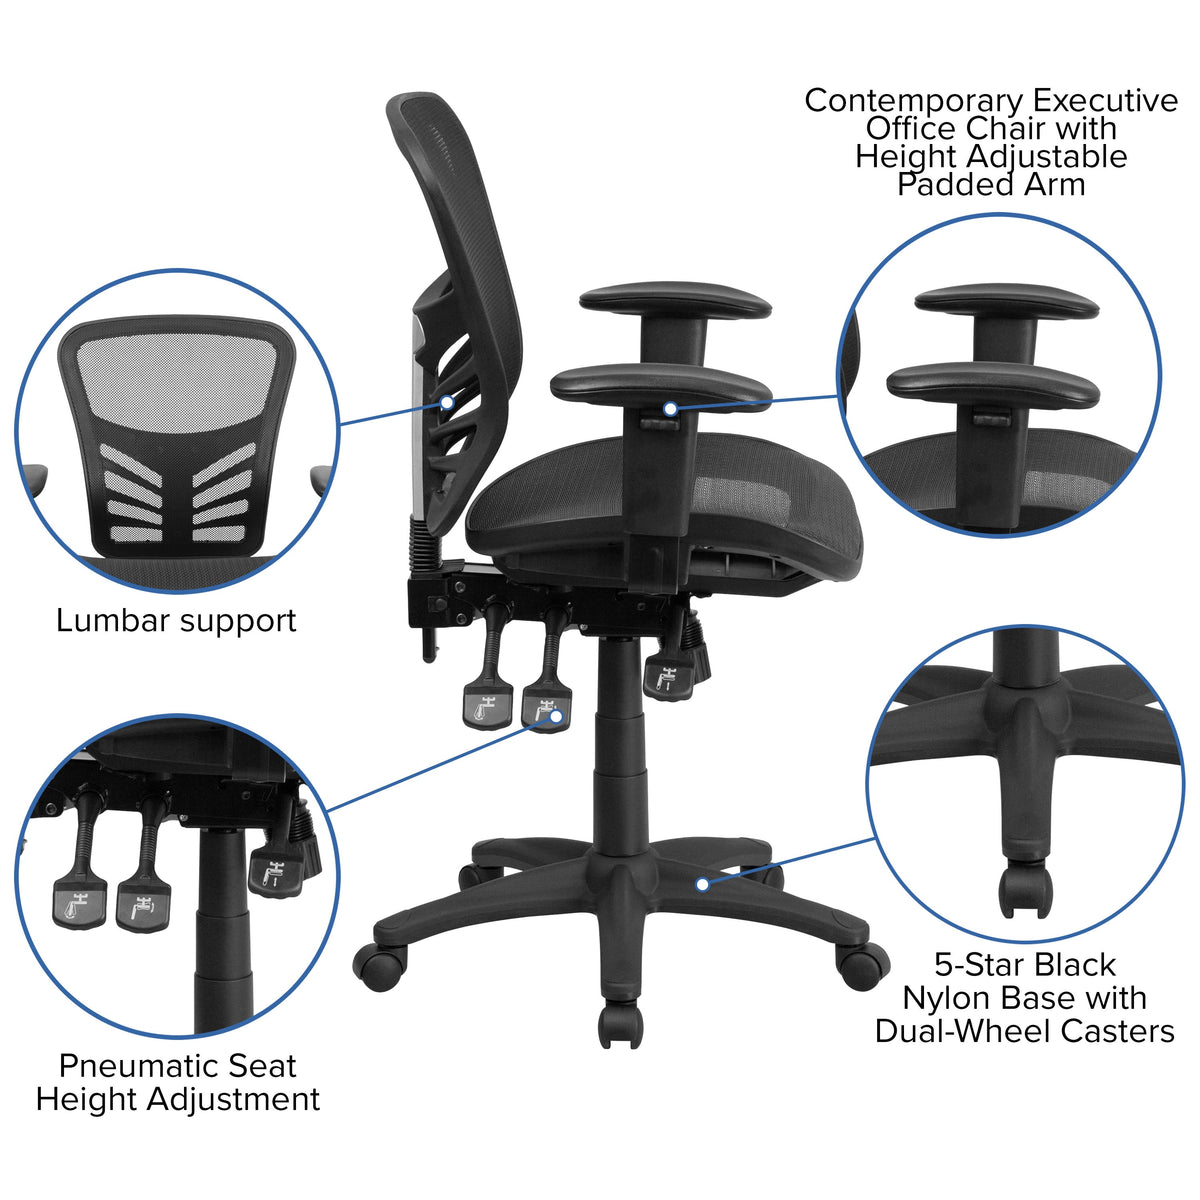 Mid-Back Black Mesh Multifunction Ergonomic Office Chair with Adjustable Arms